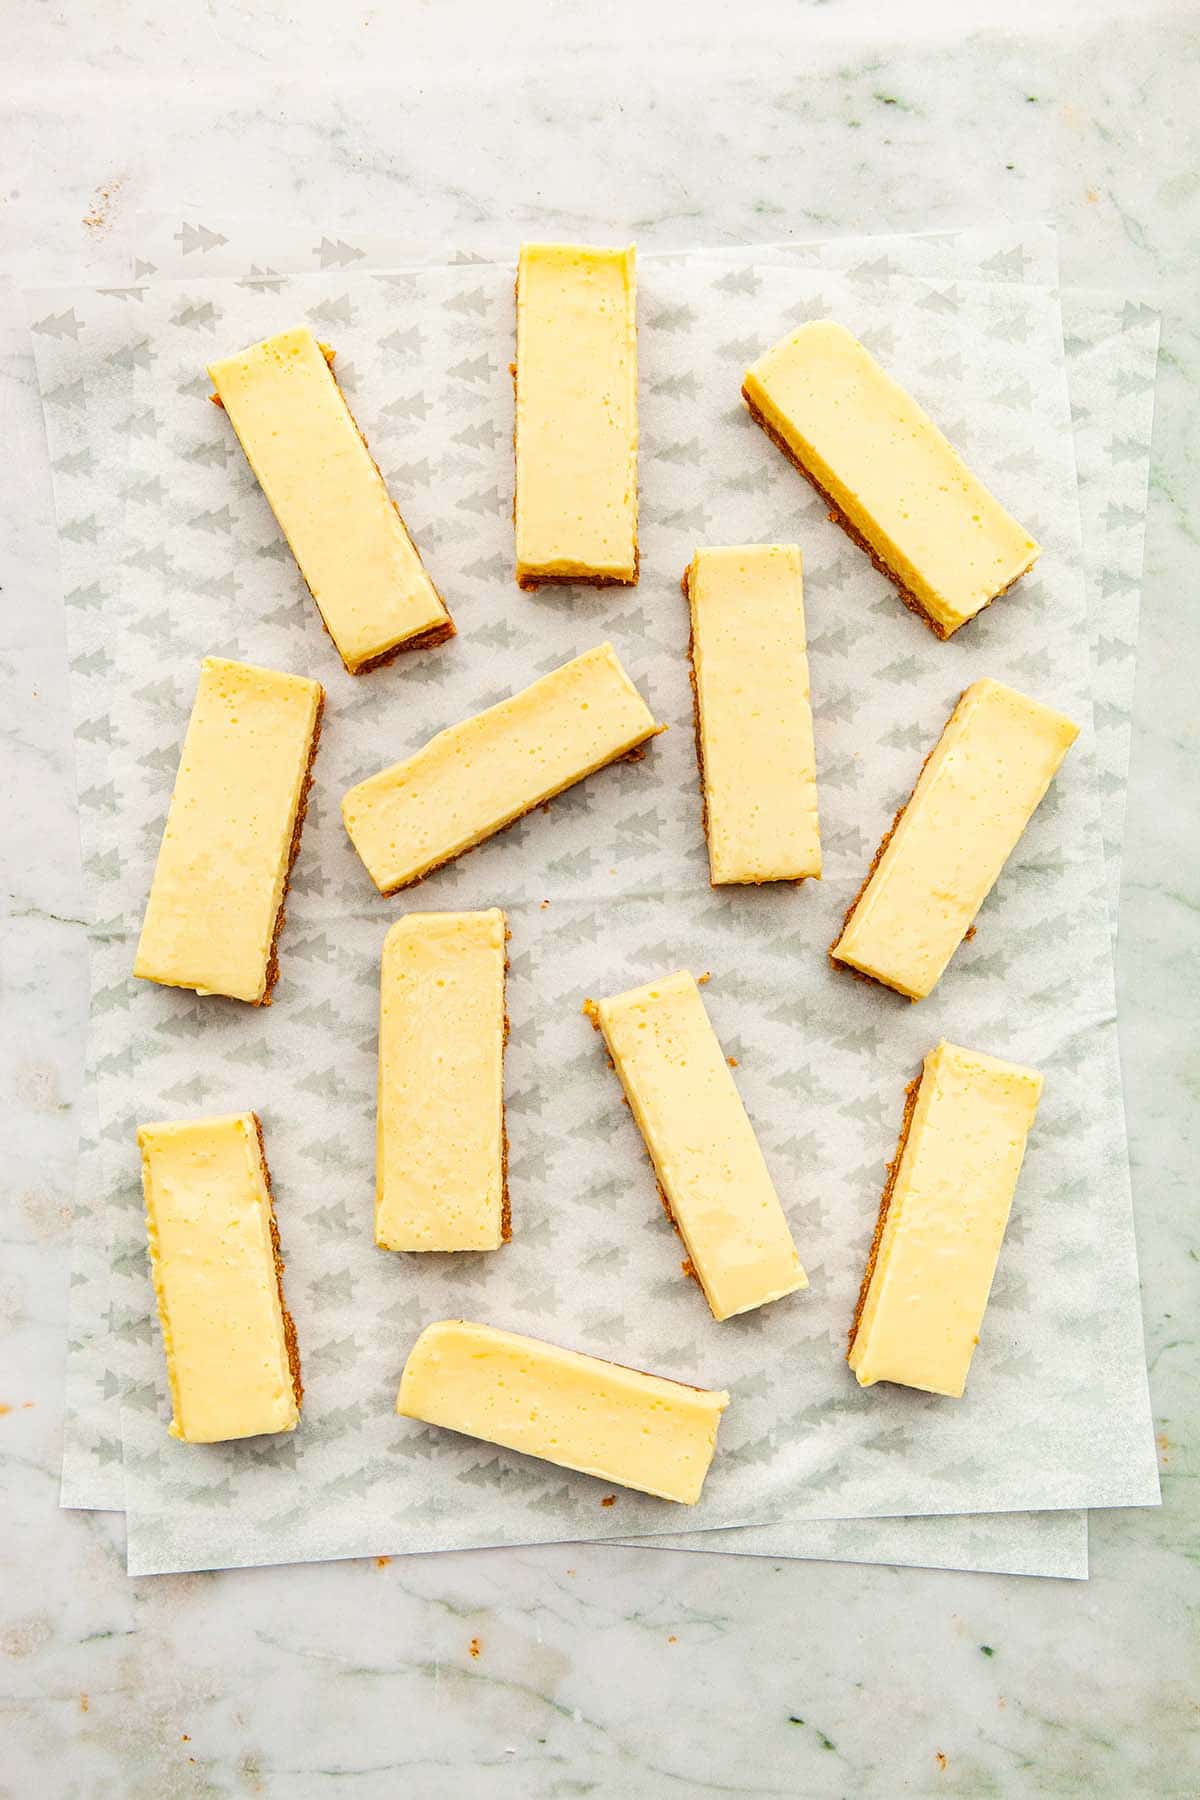 A batch of condensed milk lemon slices spread out on parchment paper on a marble background.